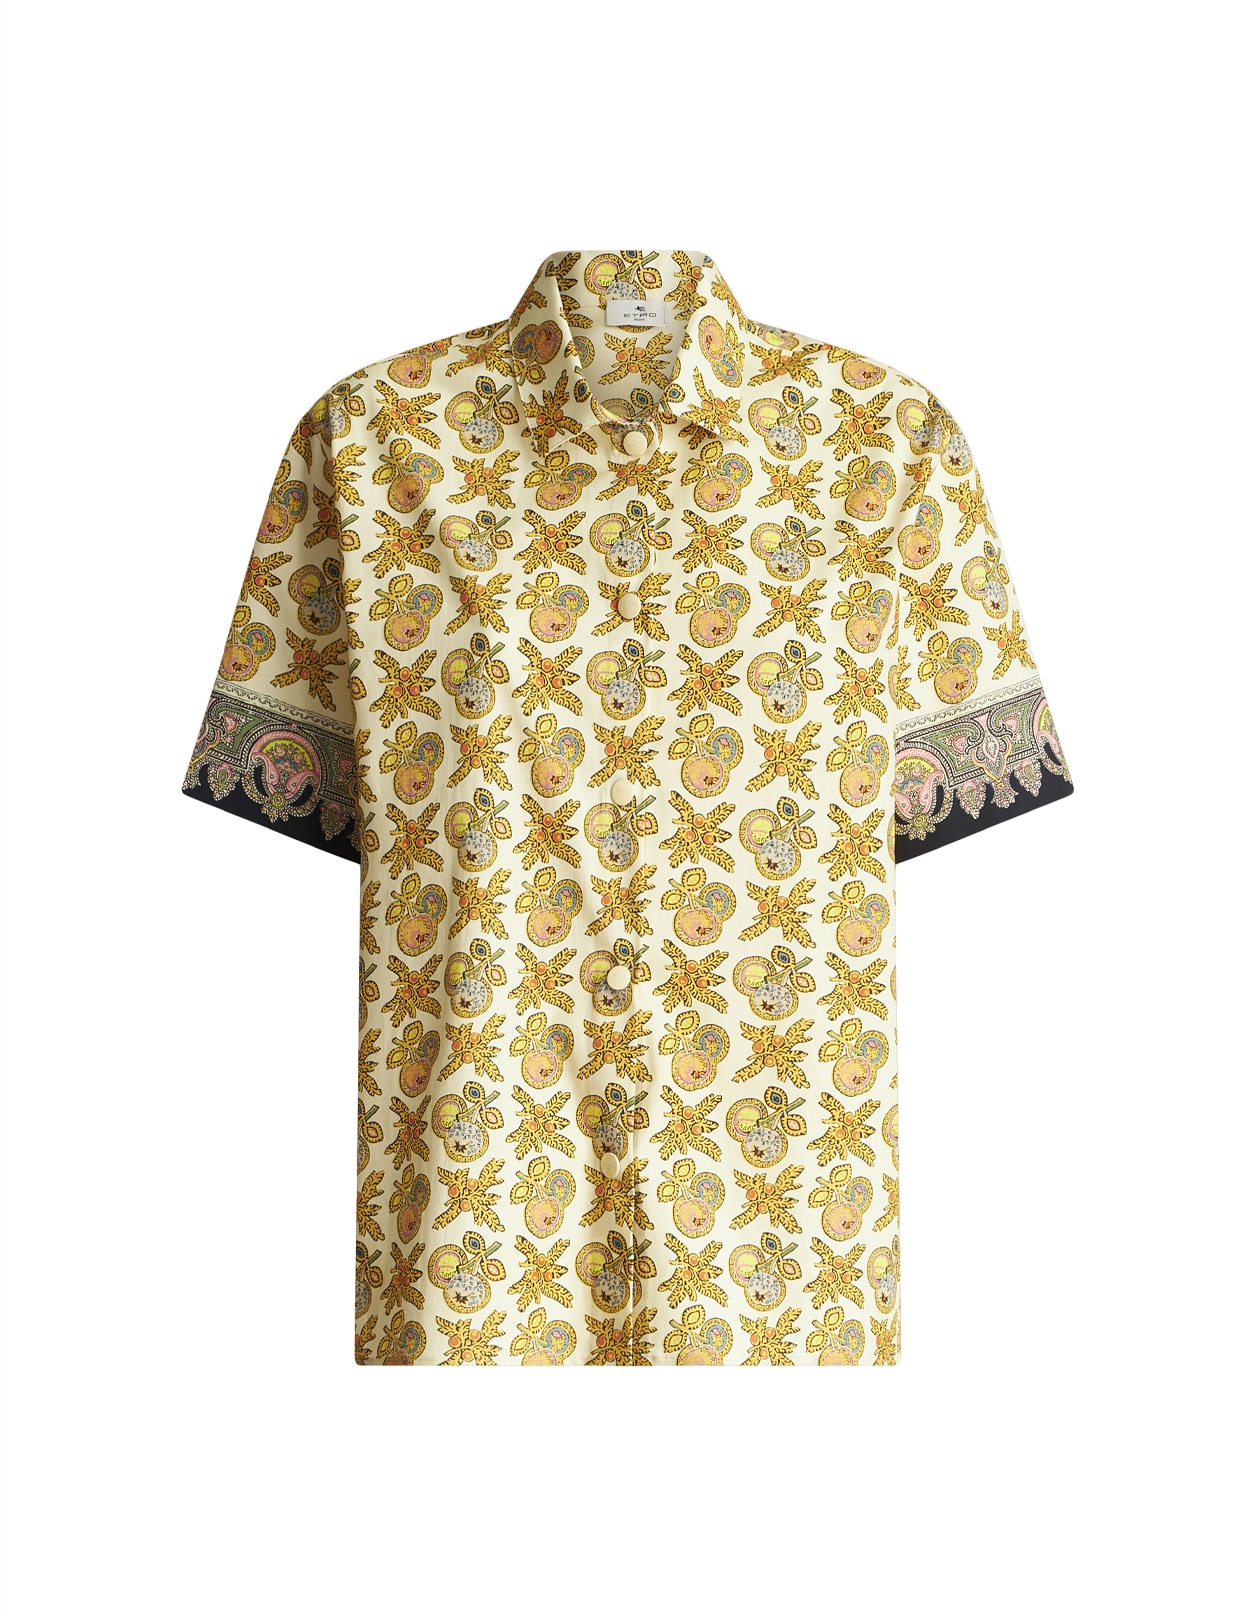 ETRO WHITE SHIRT WITH APPLES PRINT ALL-OVER